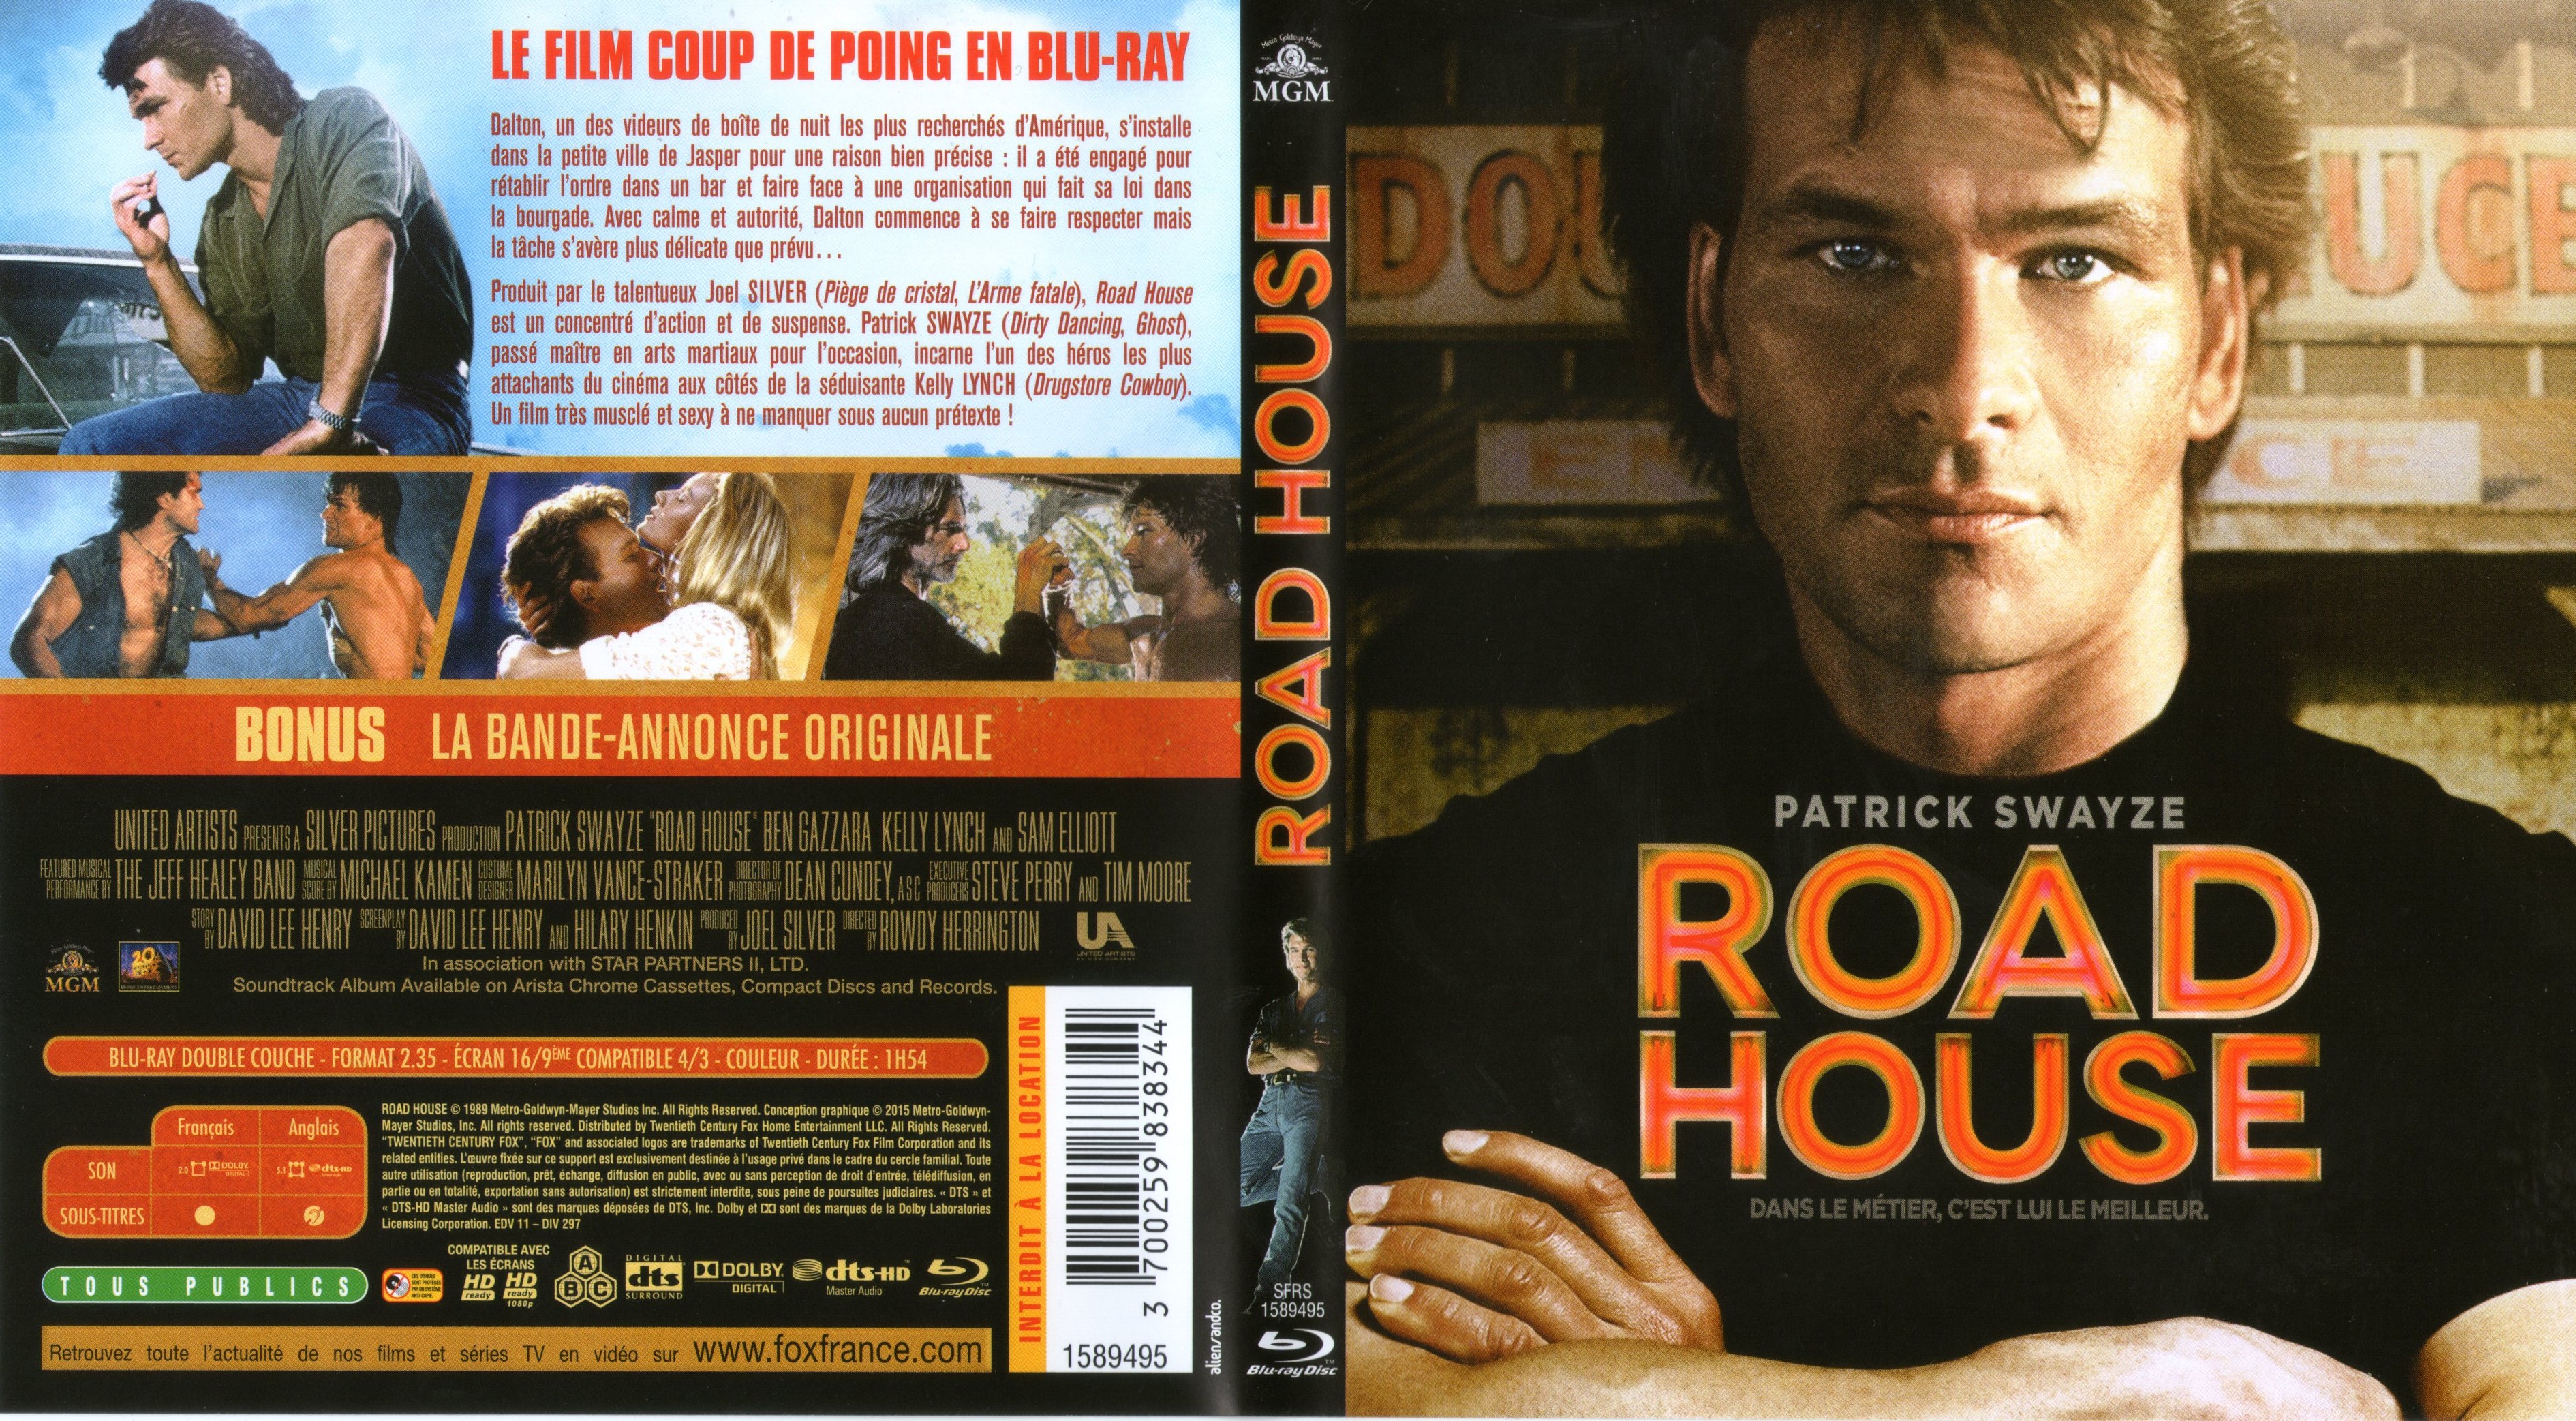 Jaquette DVD Road house (BLU-RAY)